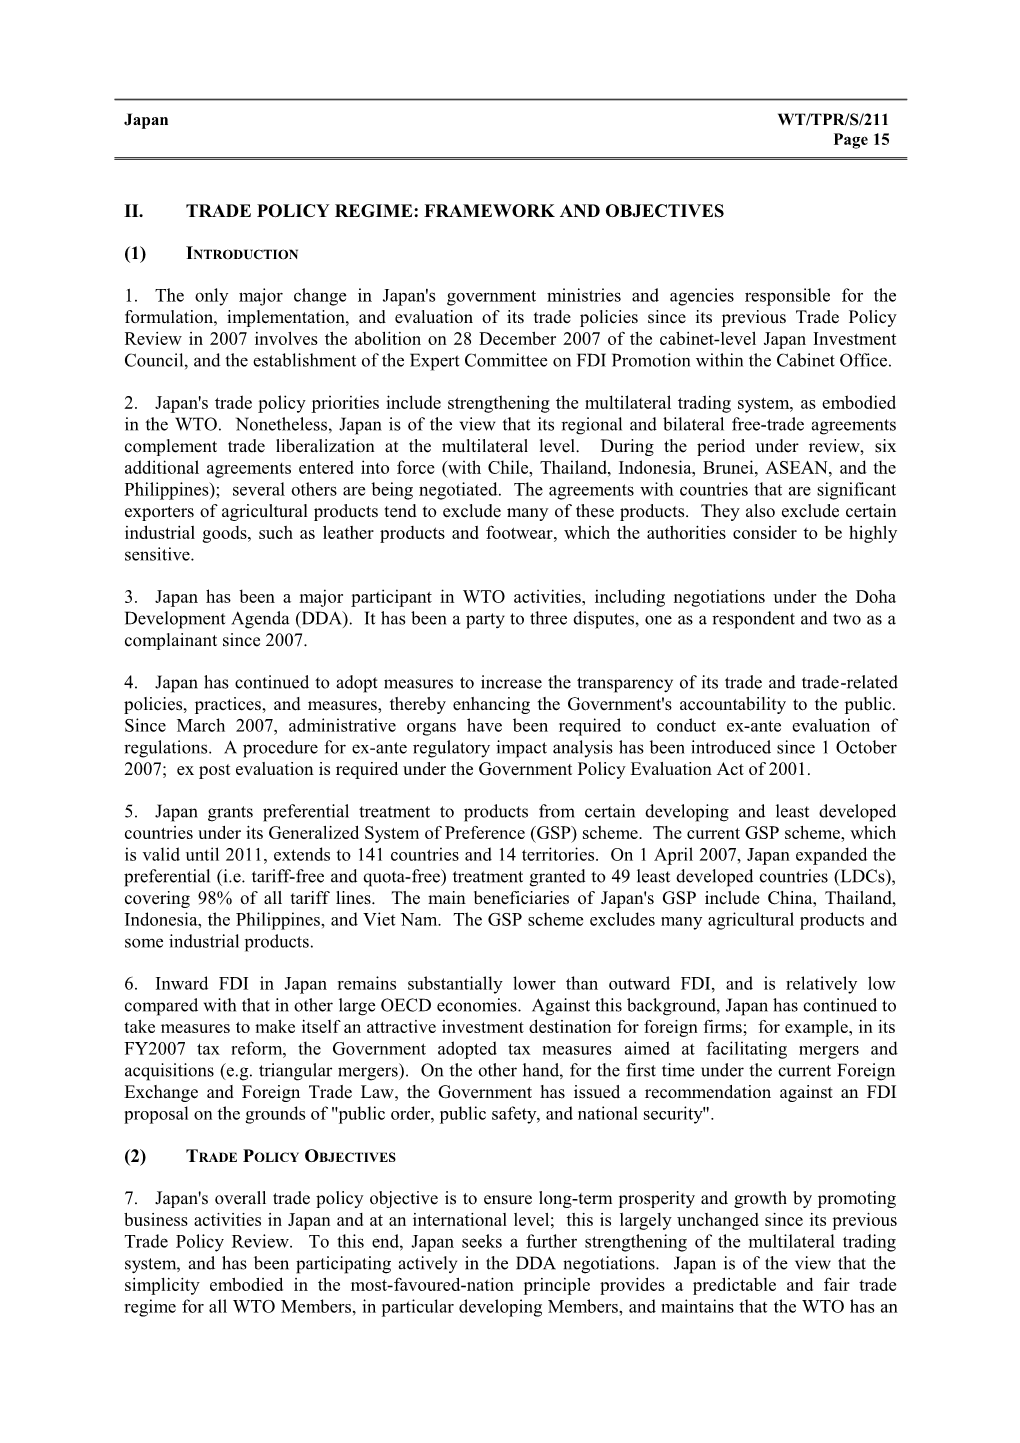 II. Trade Policy Regime: Framework and Objectives s1